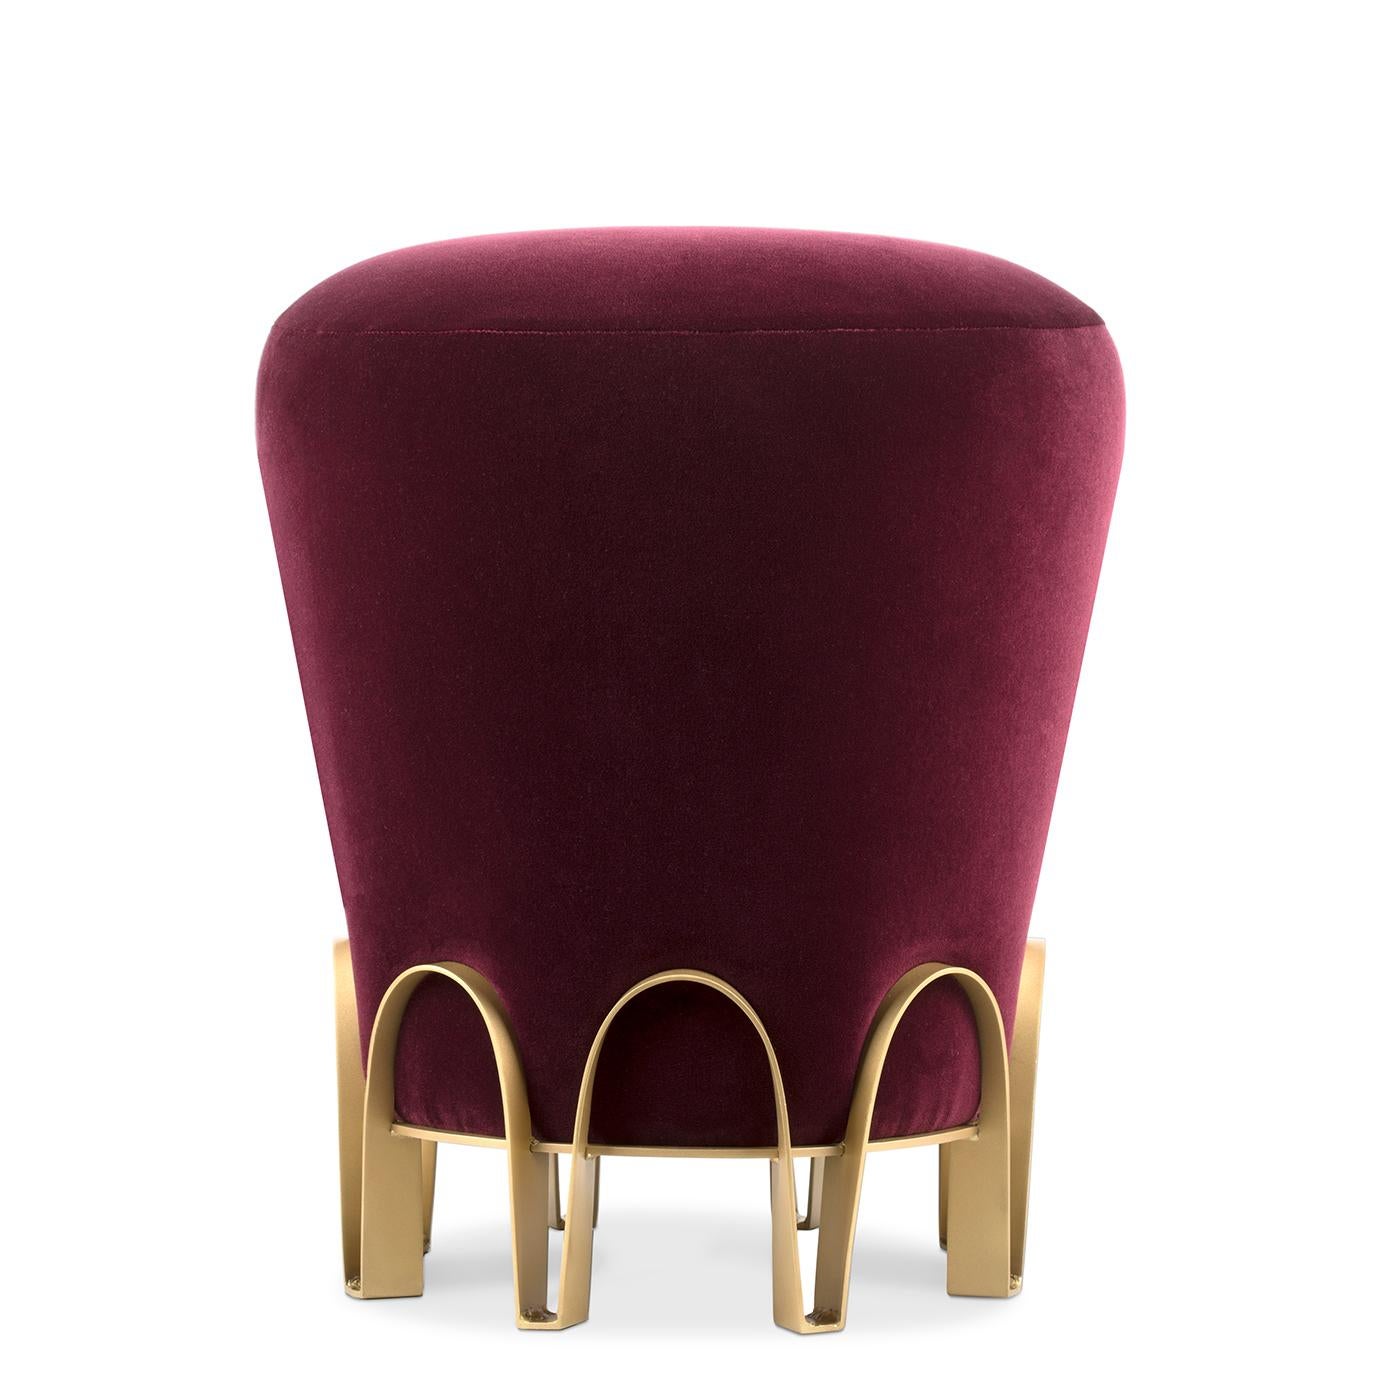 Stool Sue with wooden structure, upholstered and
covered with velvet fabric in deep red purple color.
With solid brass base in brushed finish.
Also available on request in other velvet fabric colors.